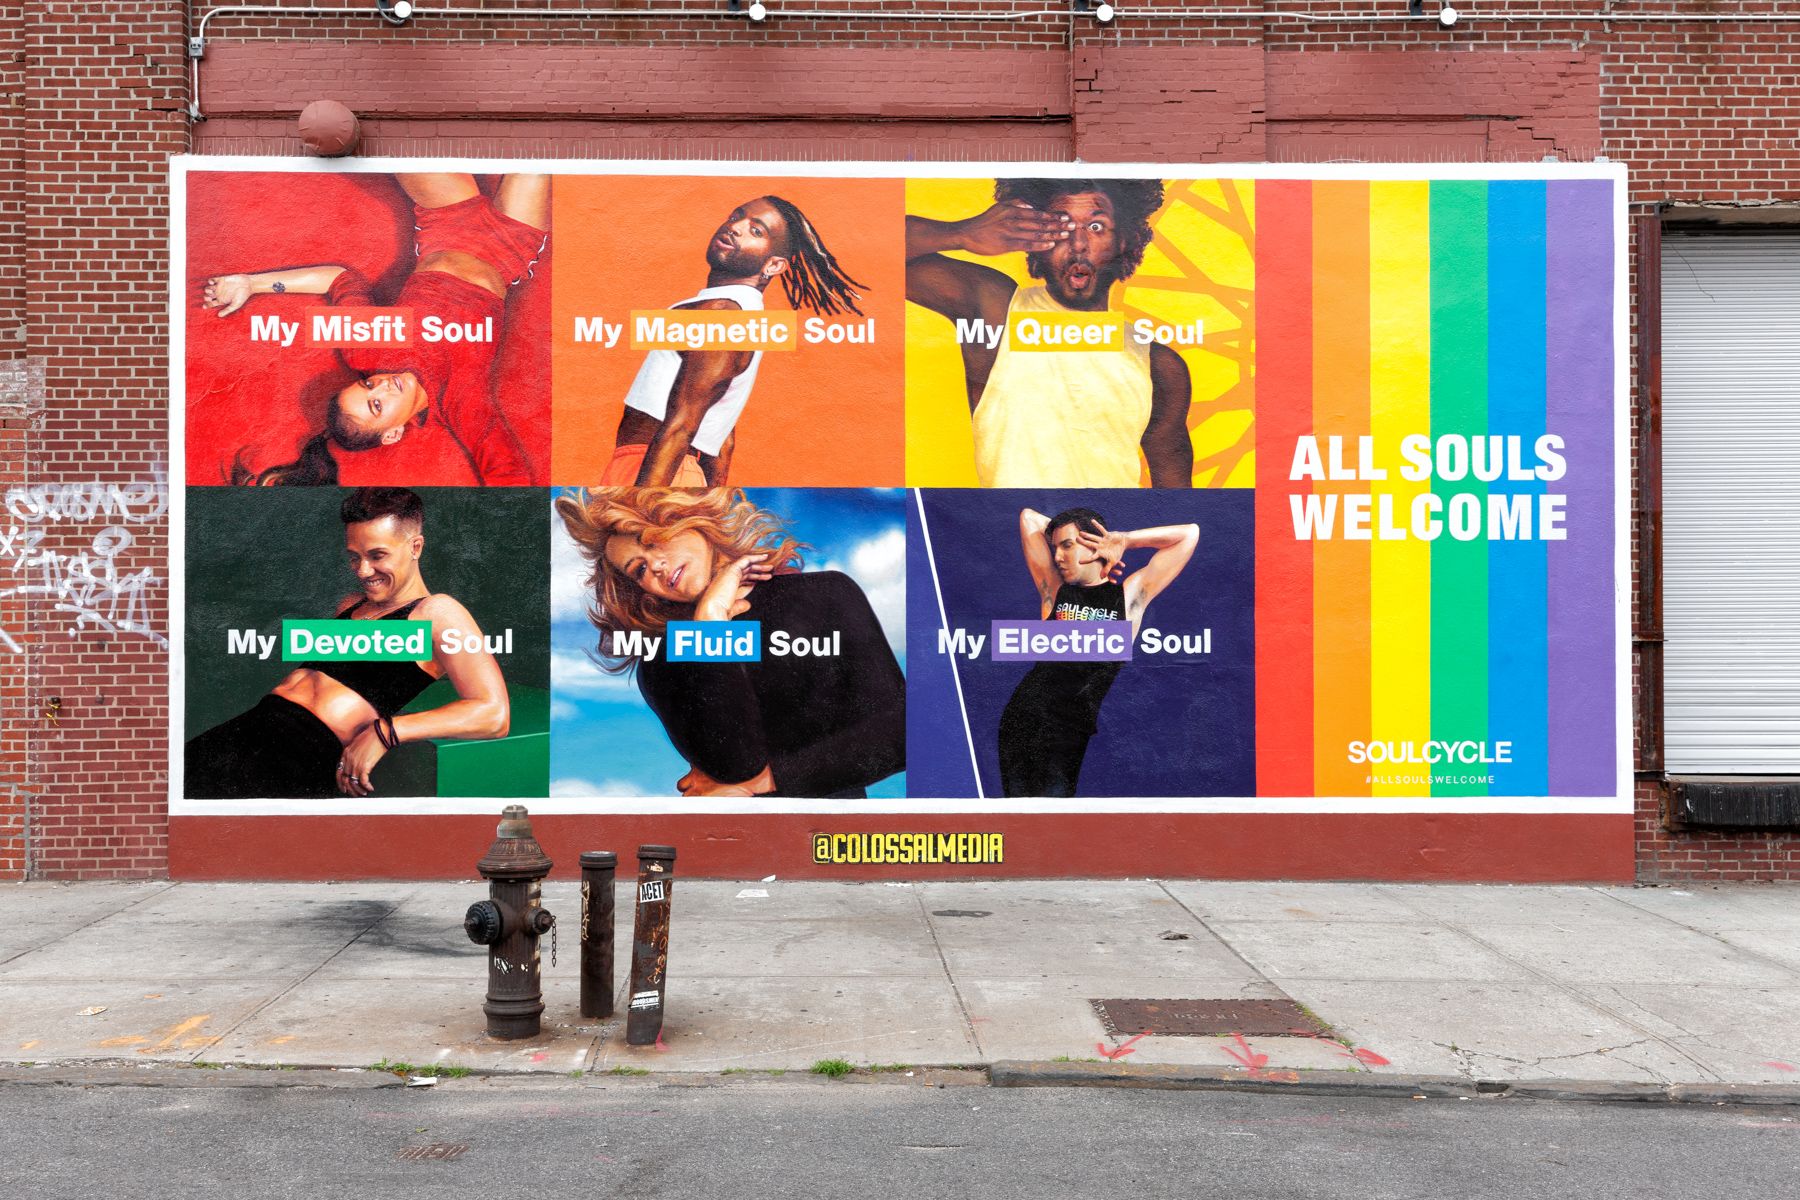 Colossal Media and SoulCycle's mural for their Pride campaign hits the streets in Williamsburg, Brooklyn.